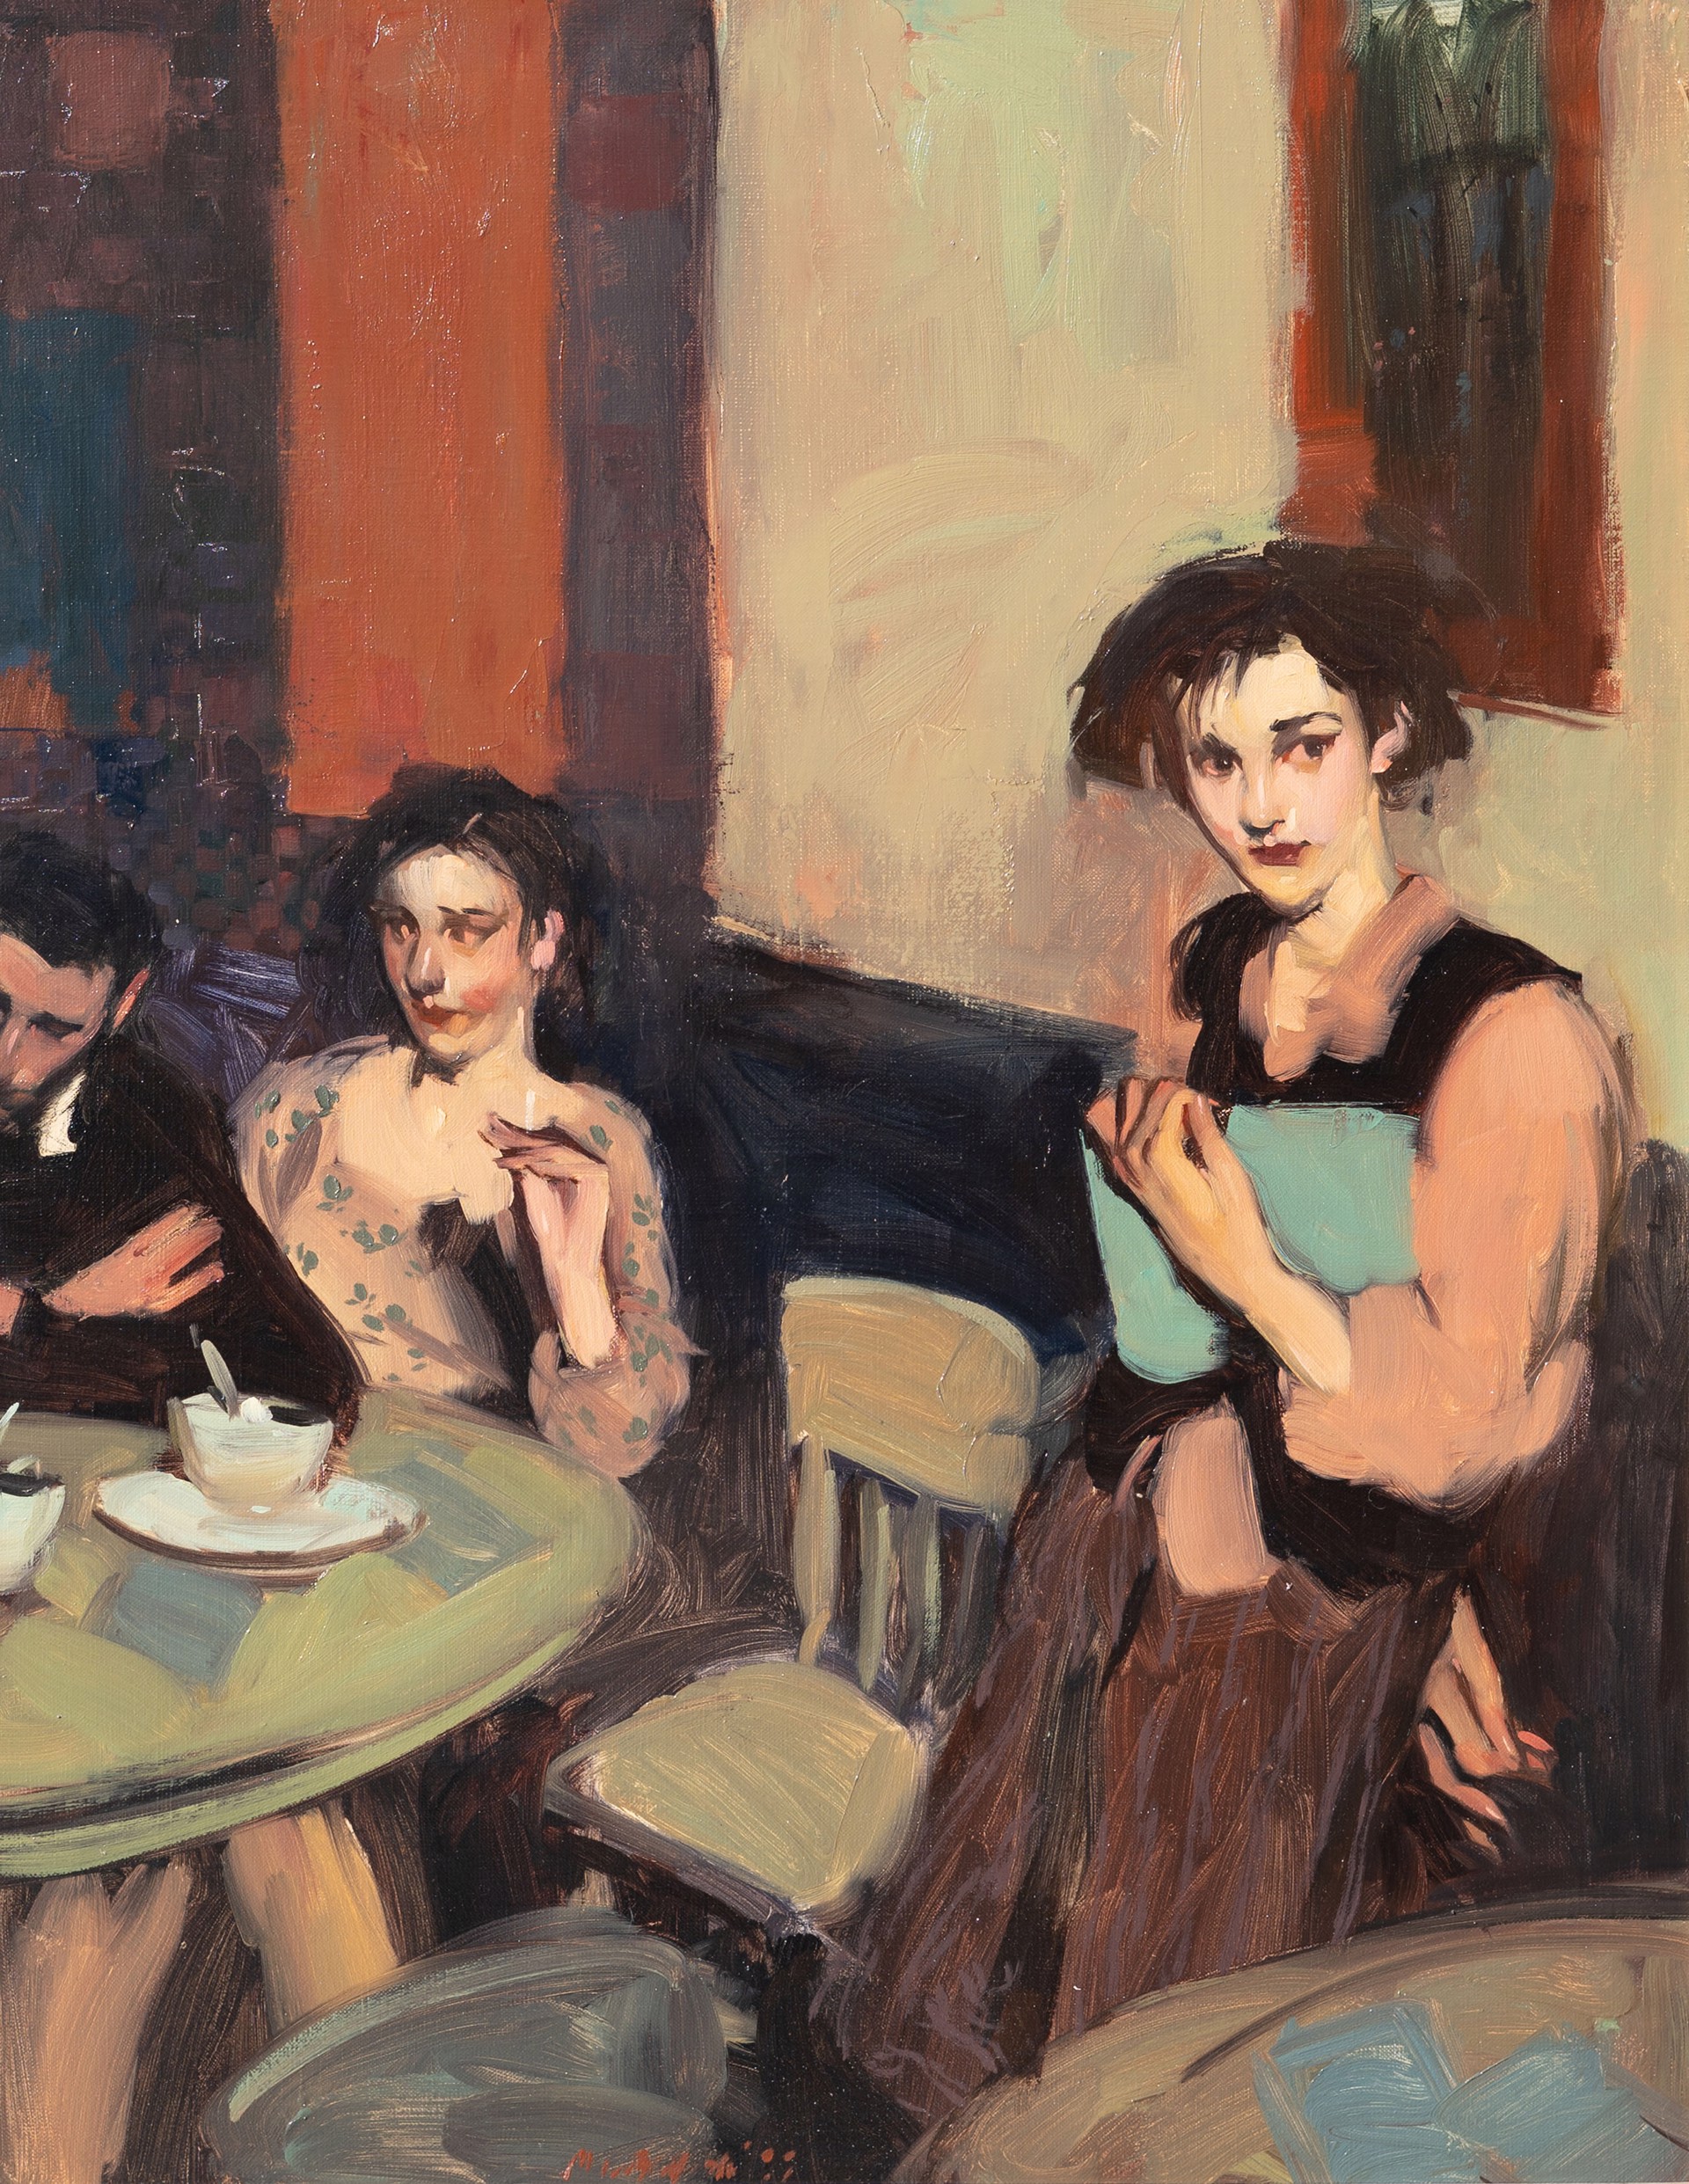 On Her Own Time by Milt Kobayashi